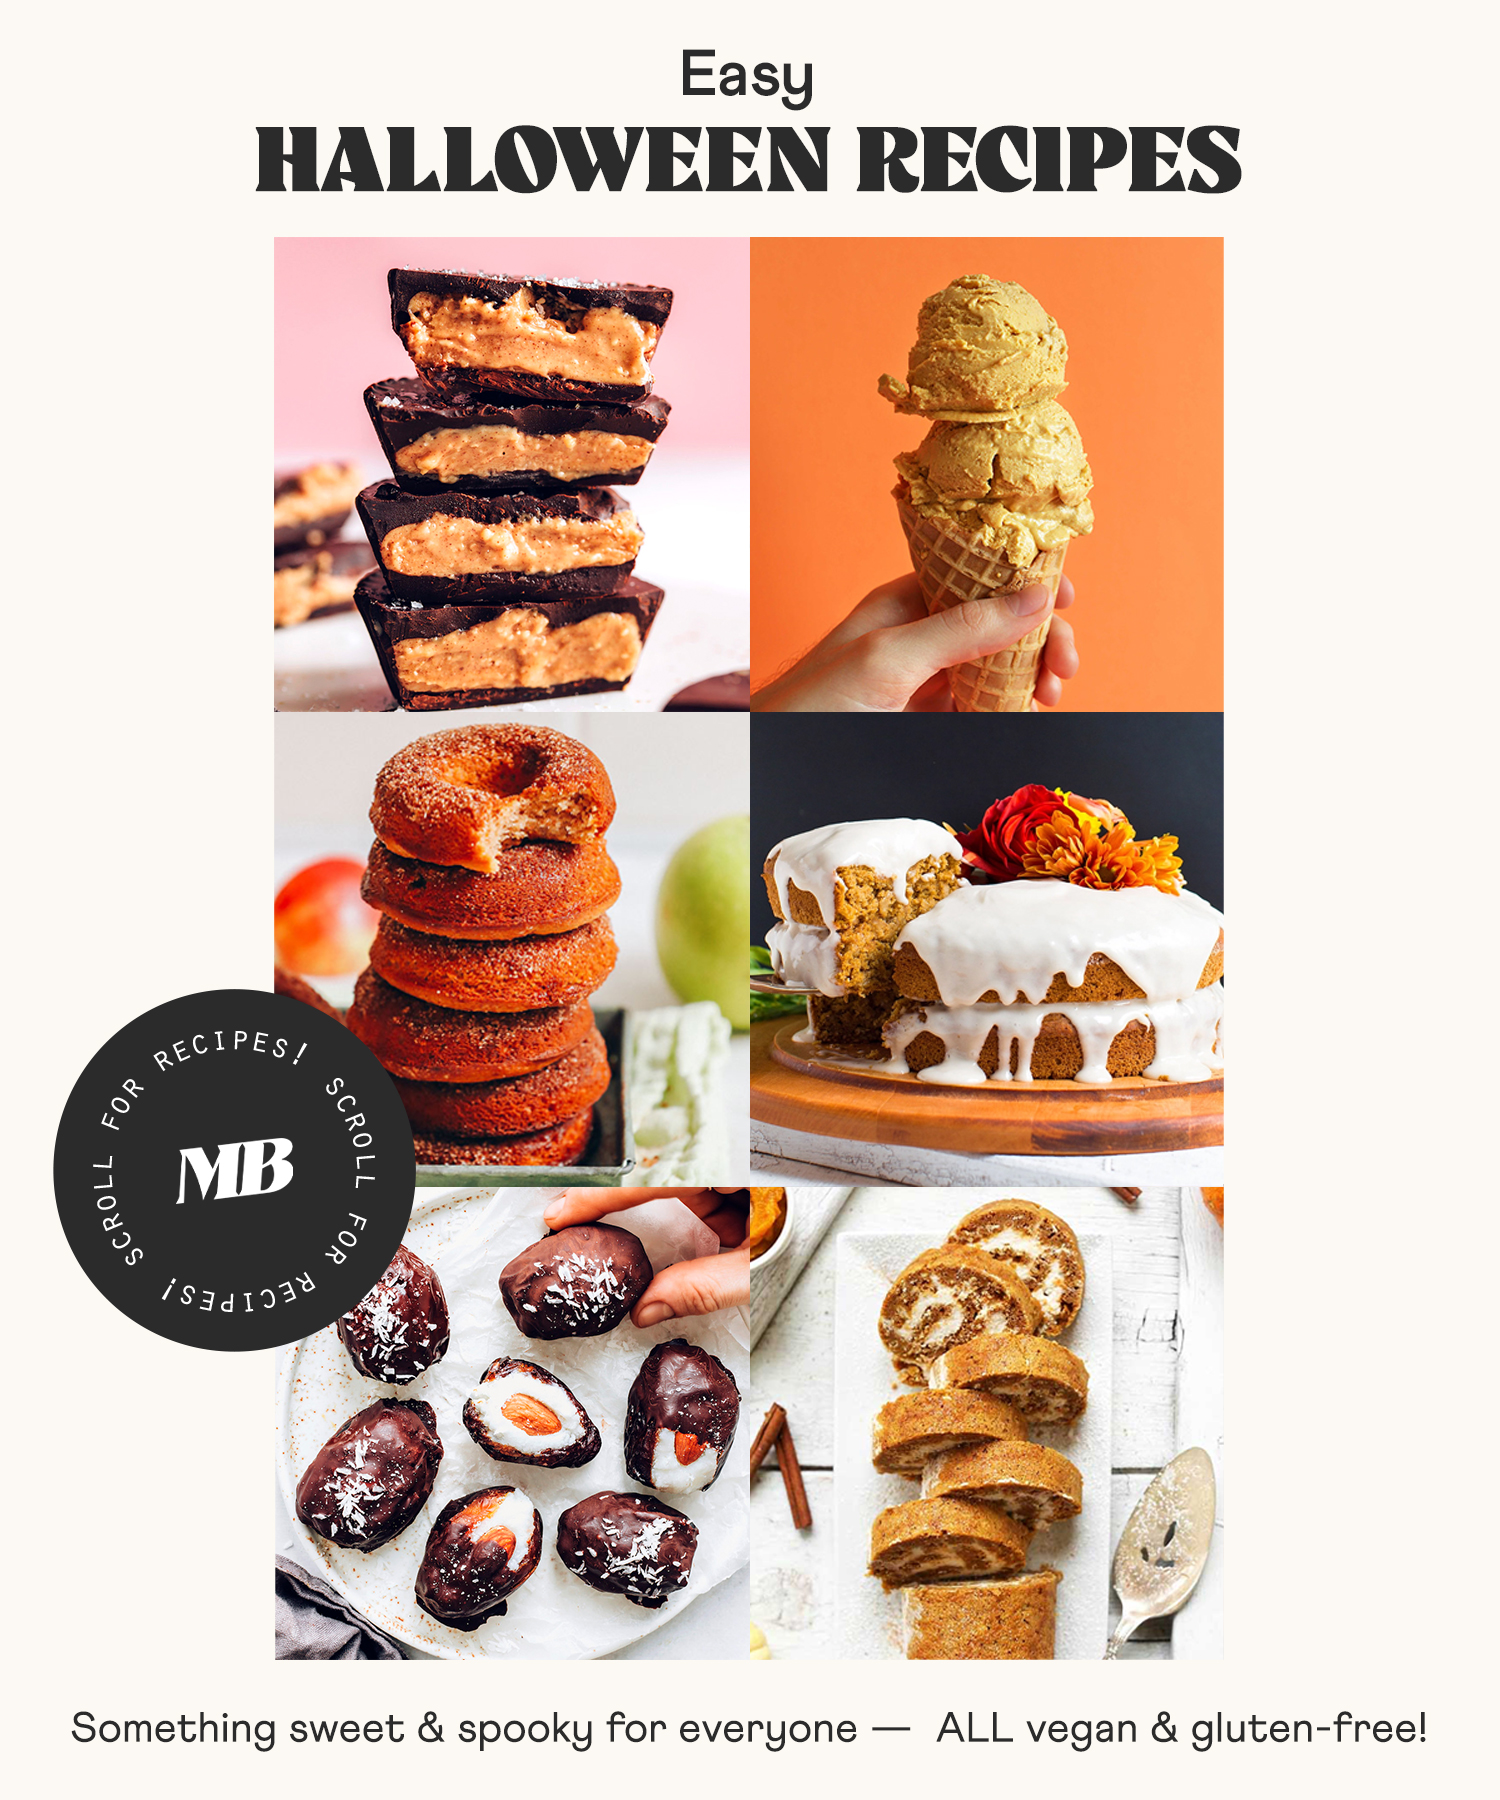 Images of easy halloween recipes